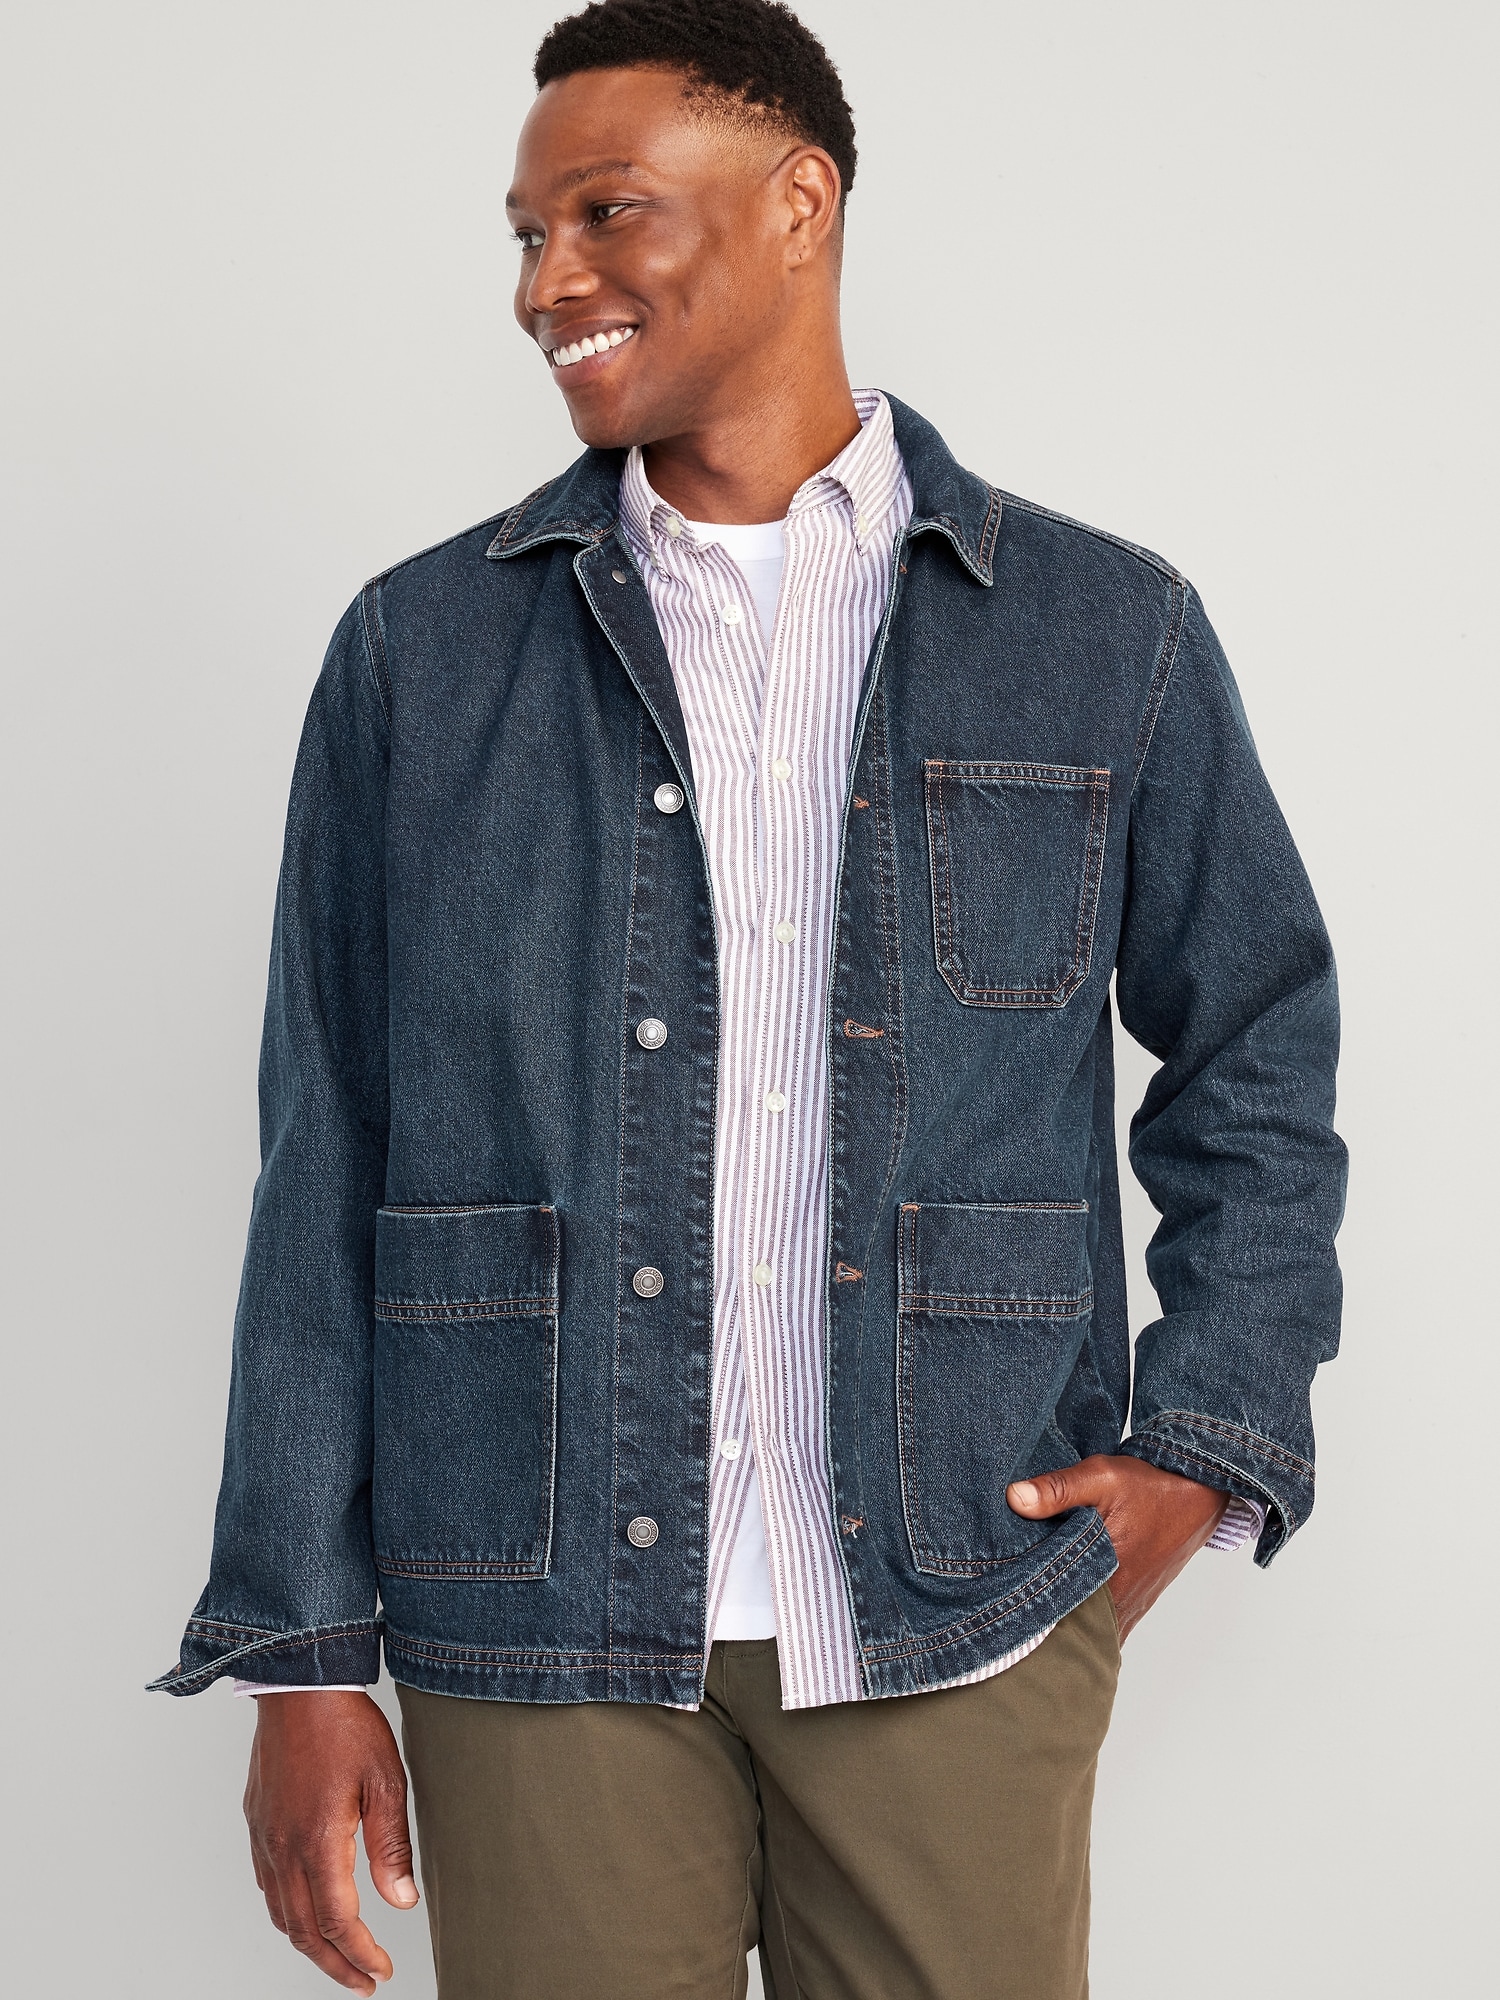 Old Navy Men's Relaxed Jean Chore Jacket